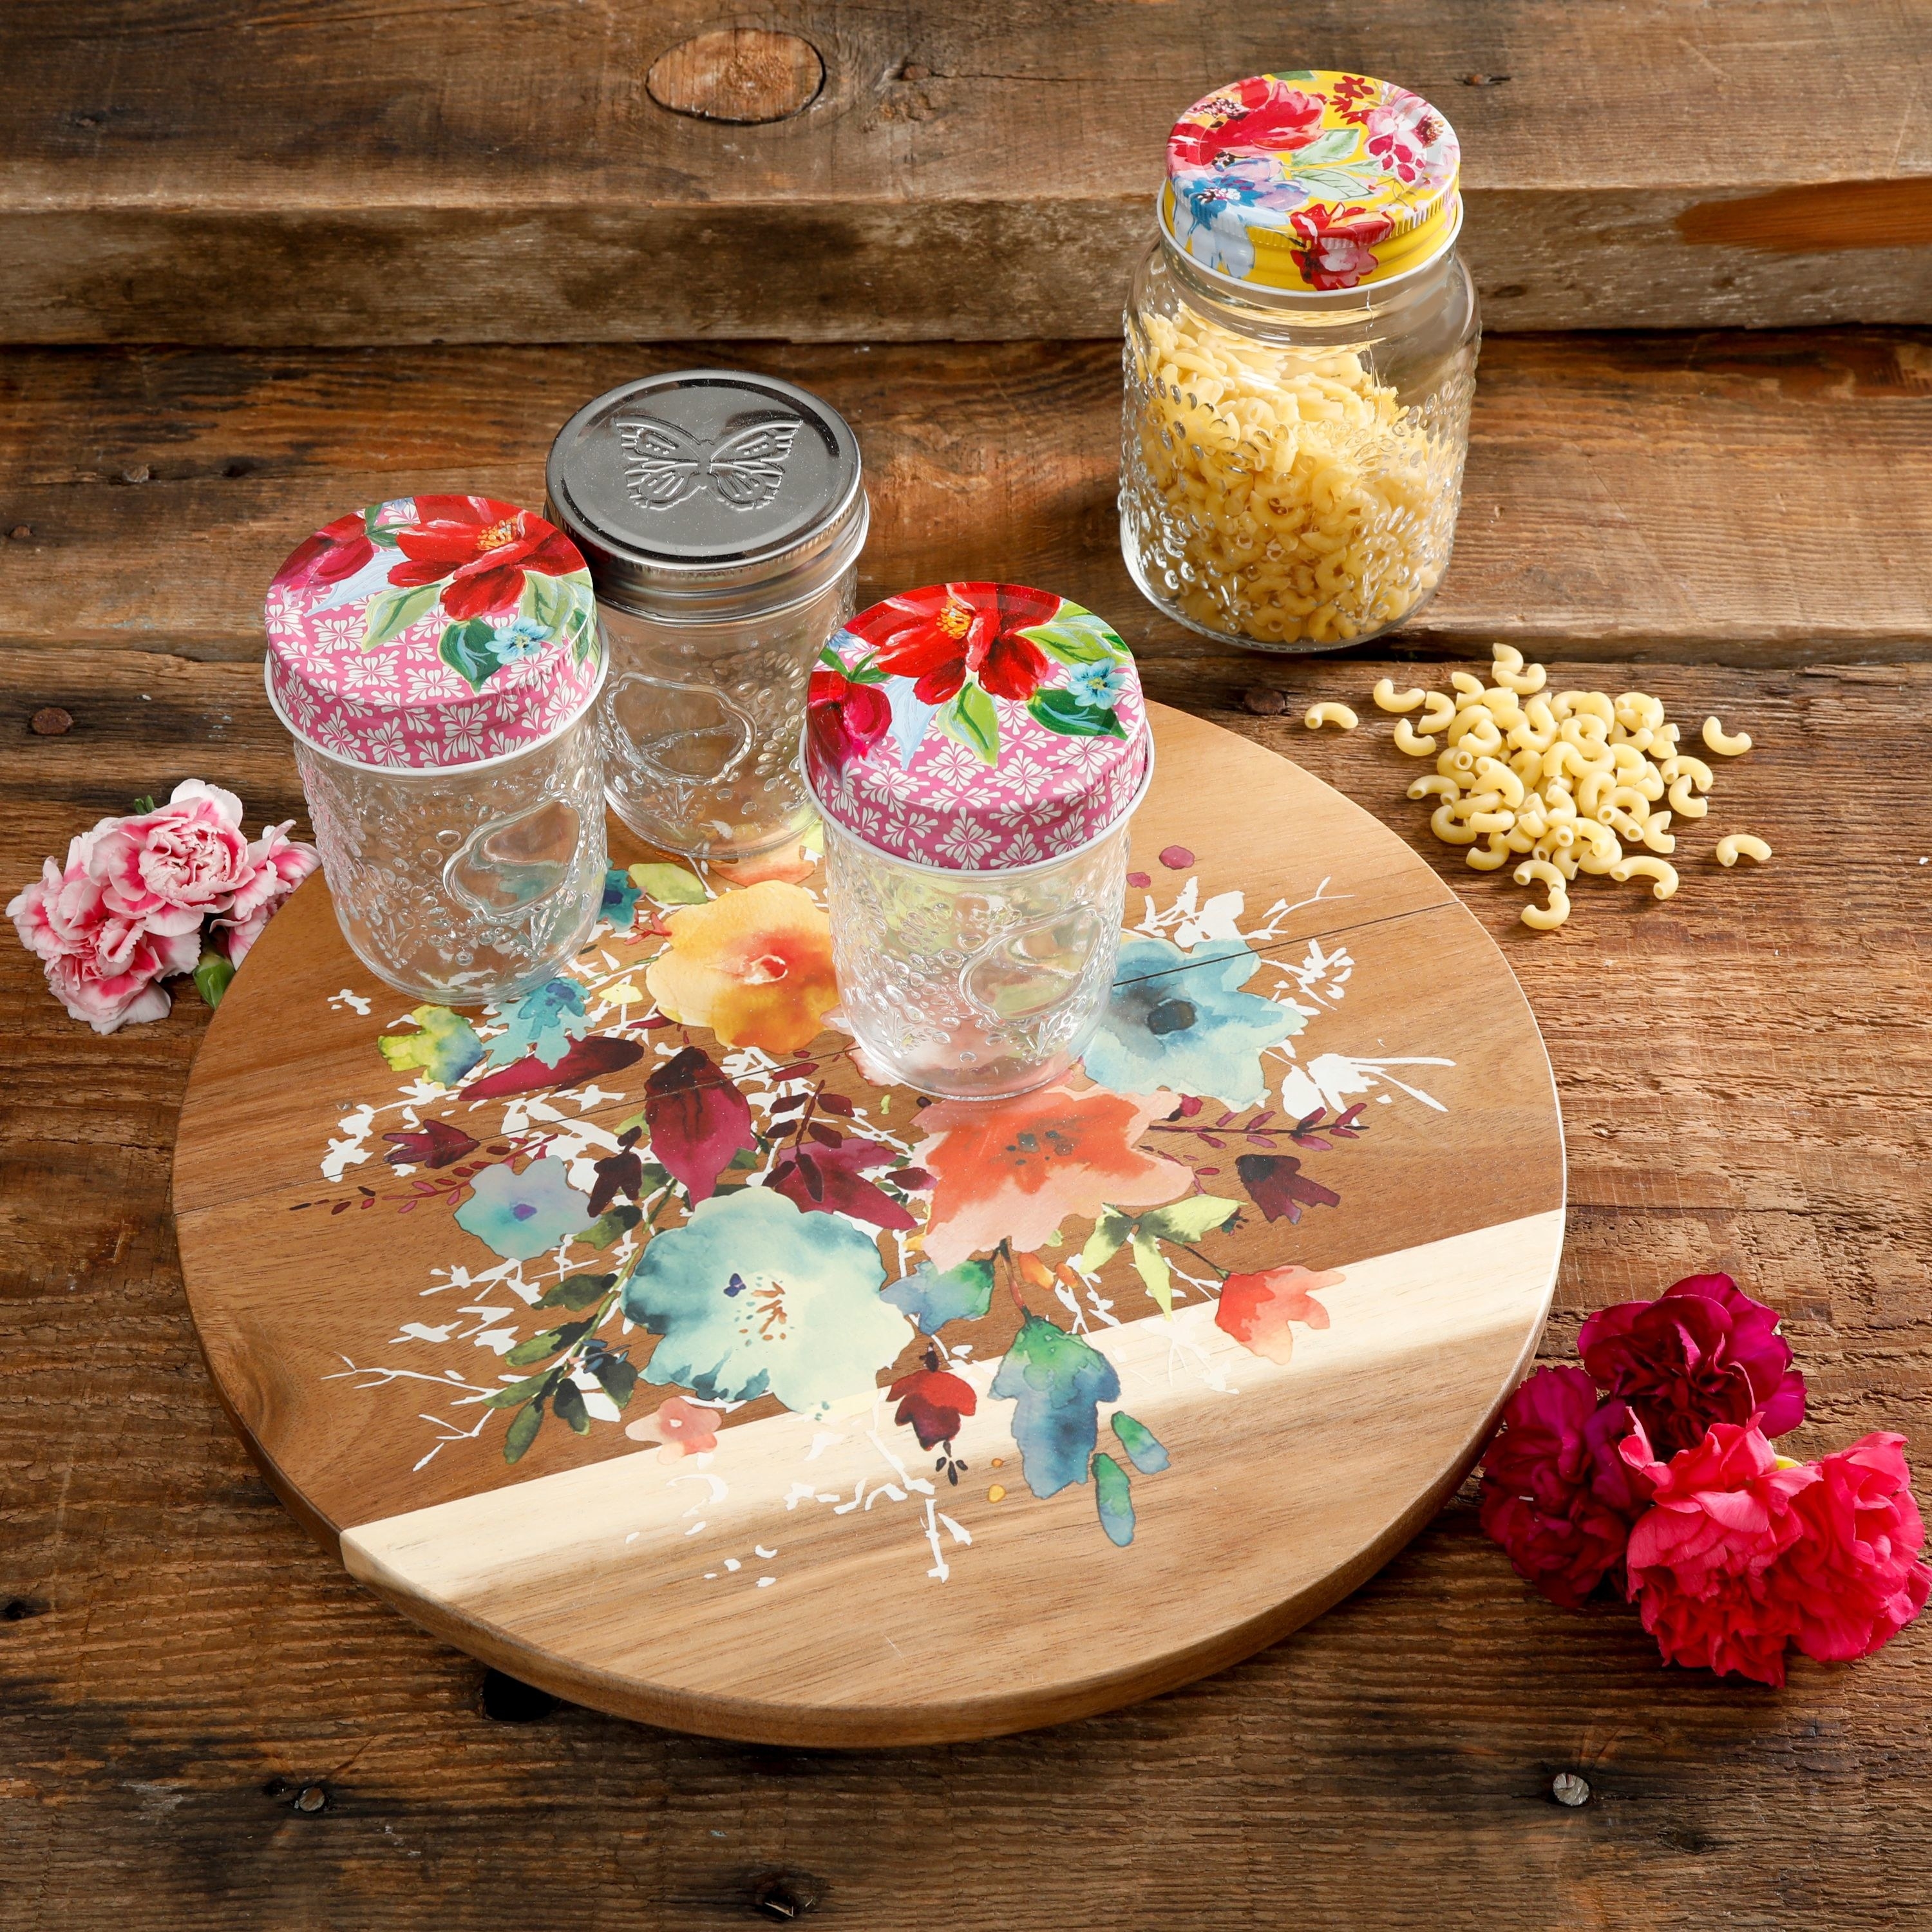 the floral turntable with mason jars on top